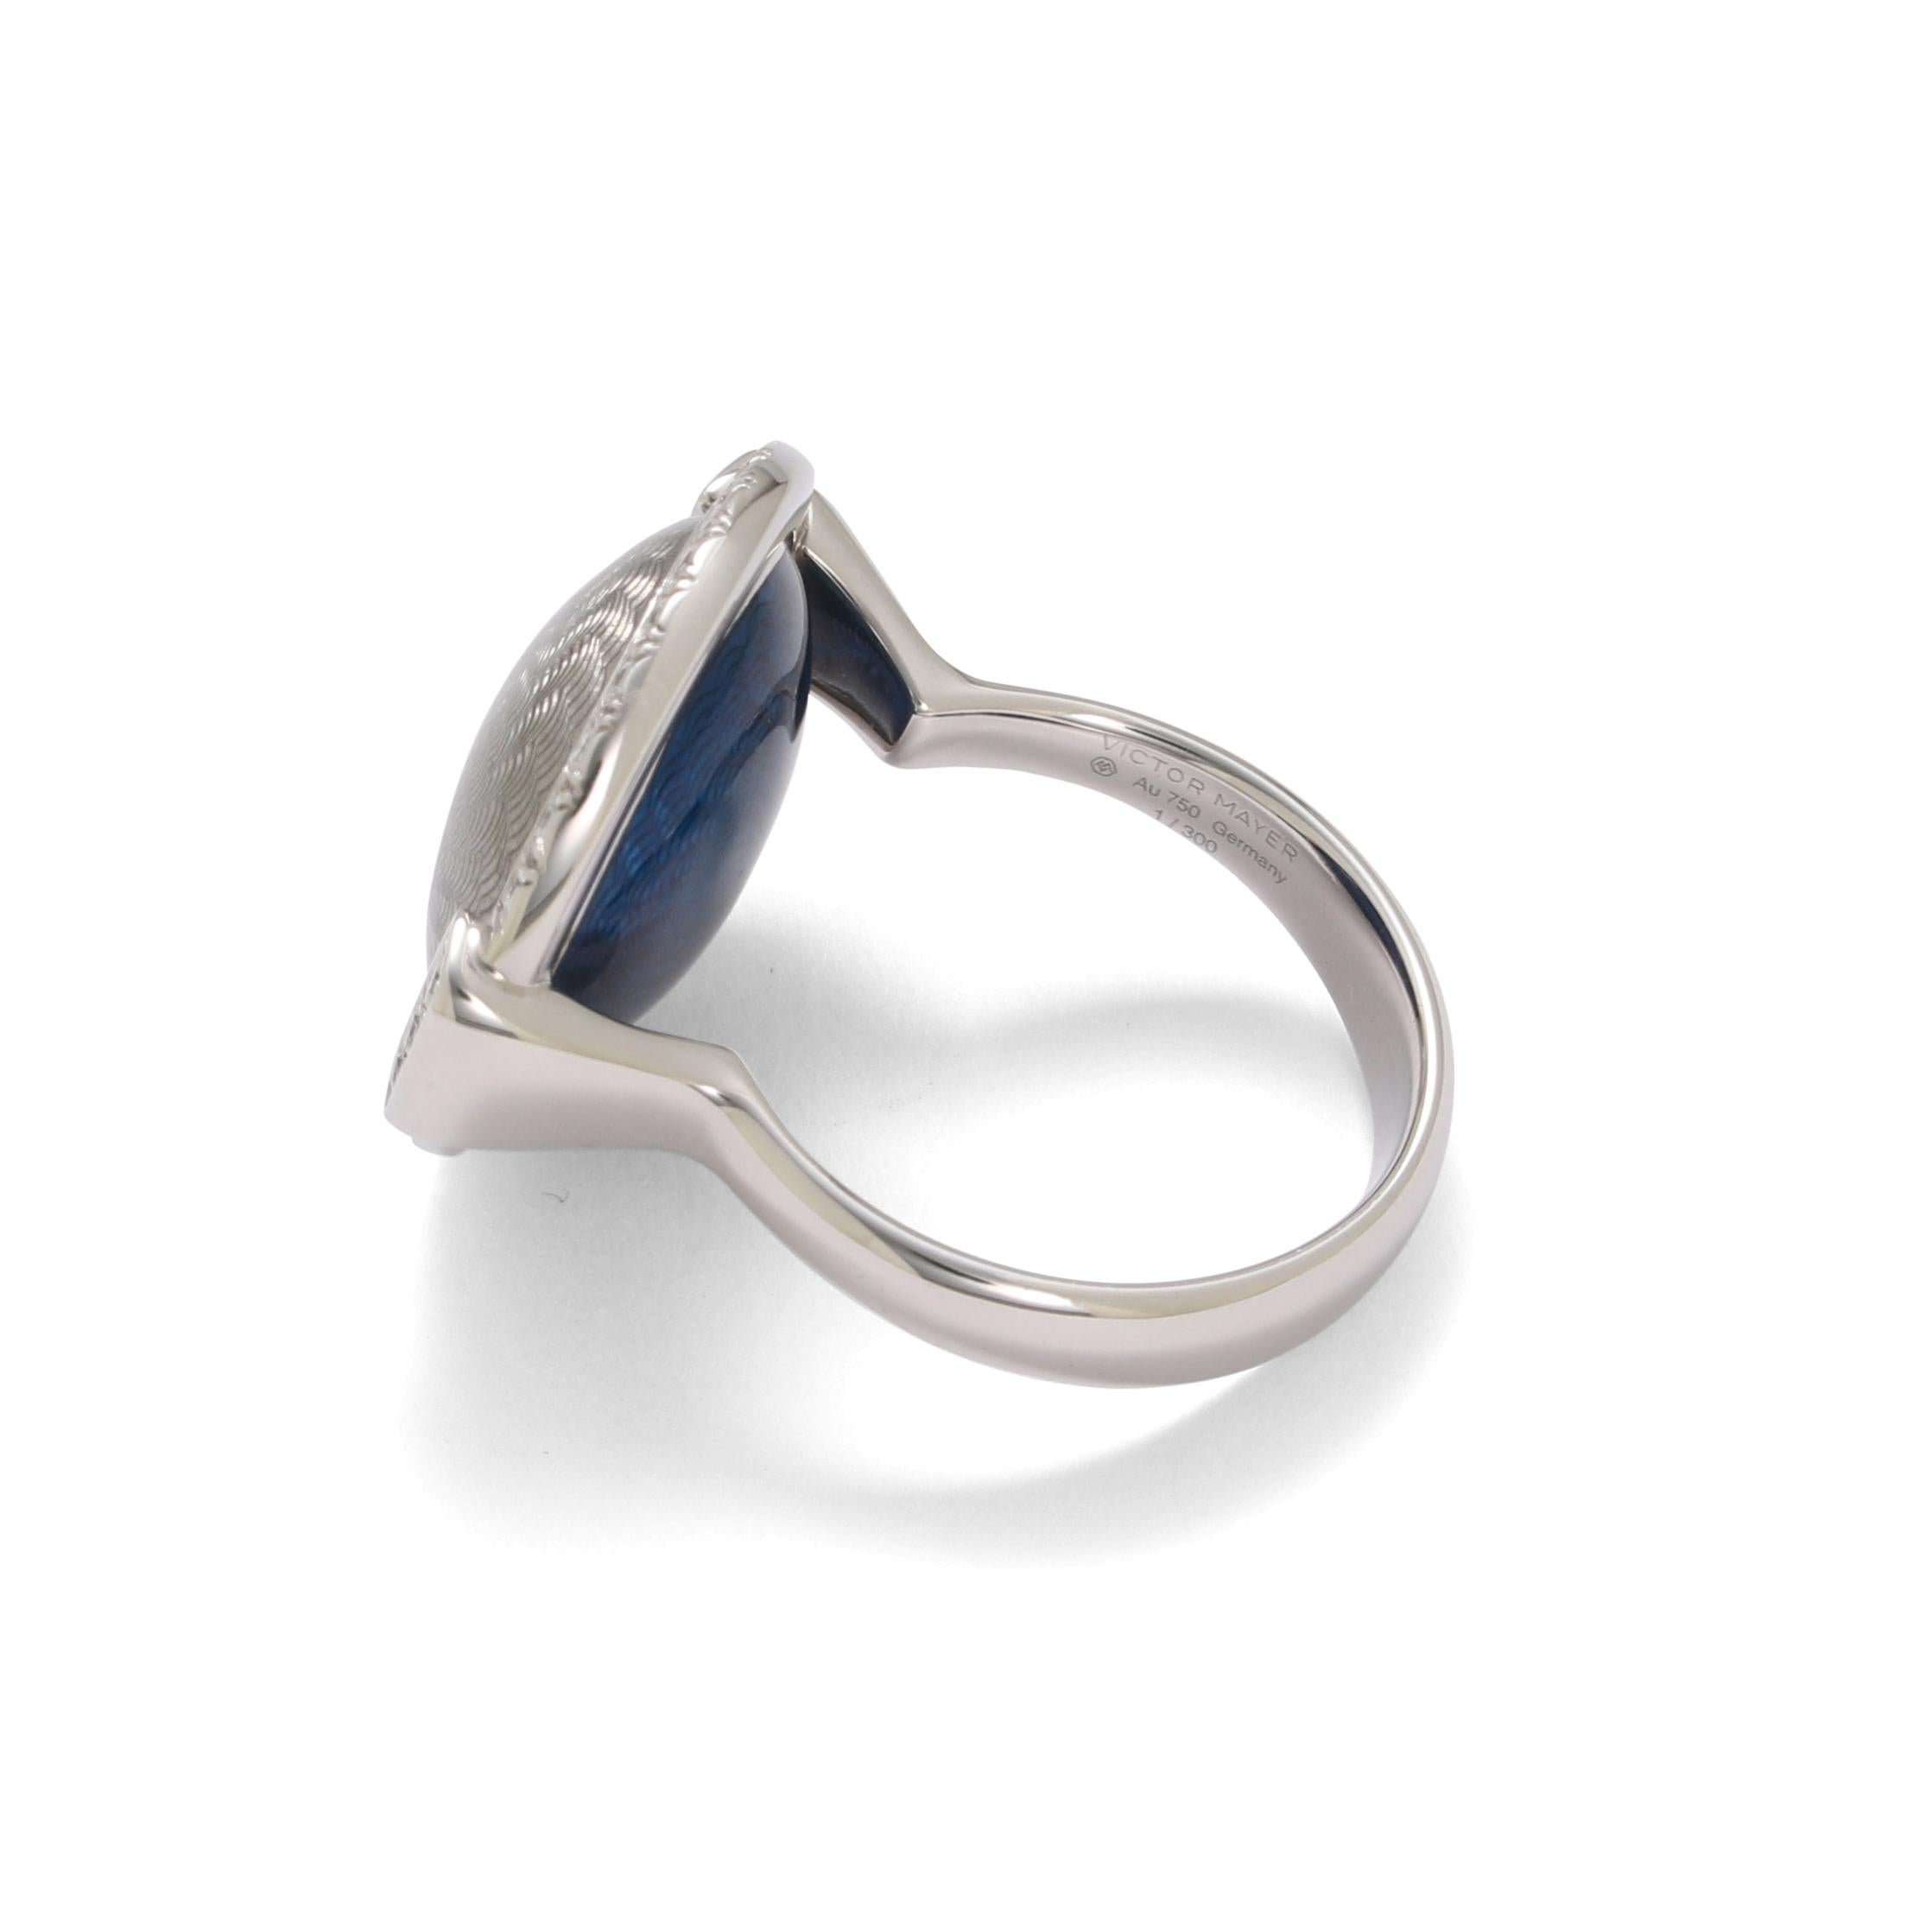 Contemporary Victor Mayer Ring Candy Silver Blue Enamel 18k White Gold 78 Diamonds 0.47 ct For Sale